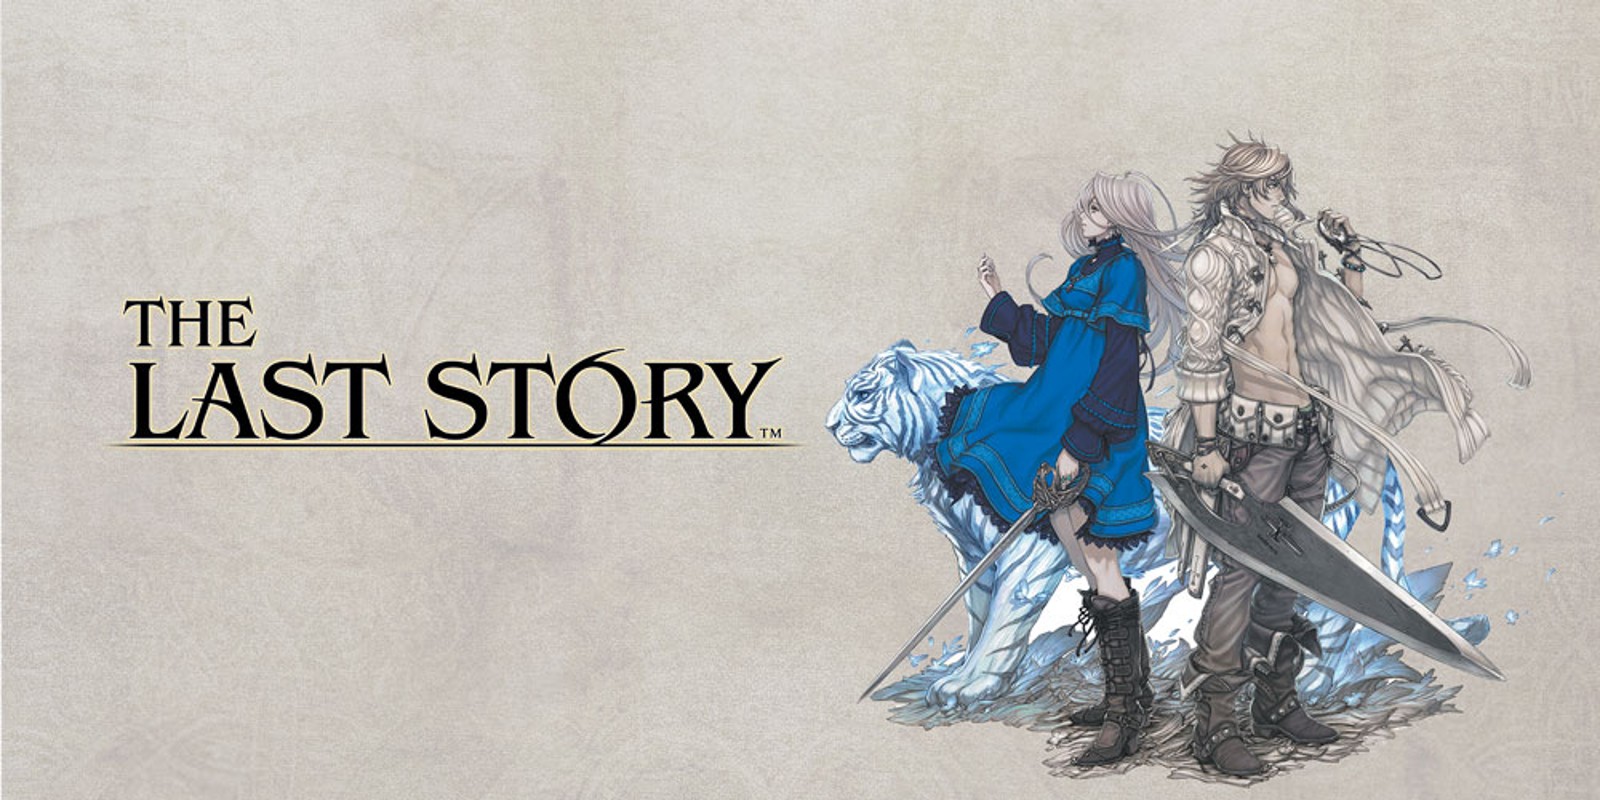 the last story wii game